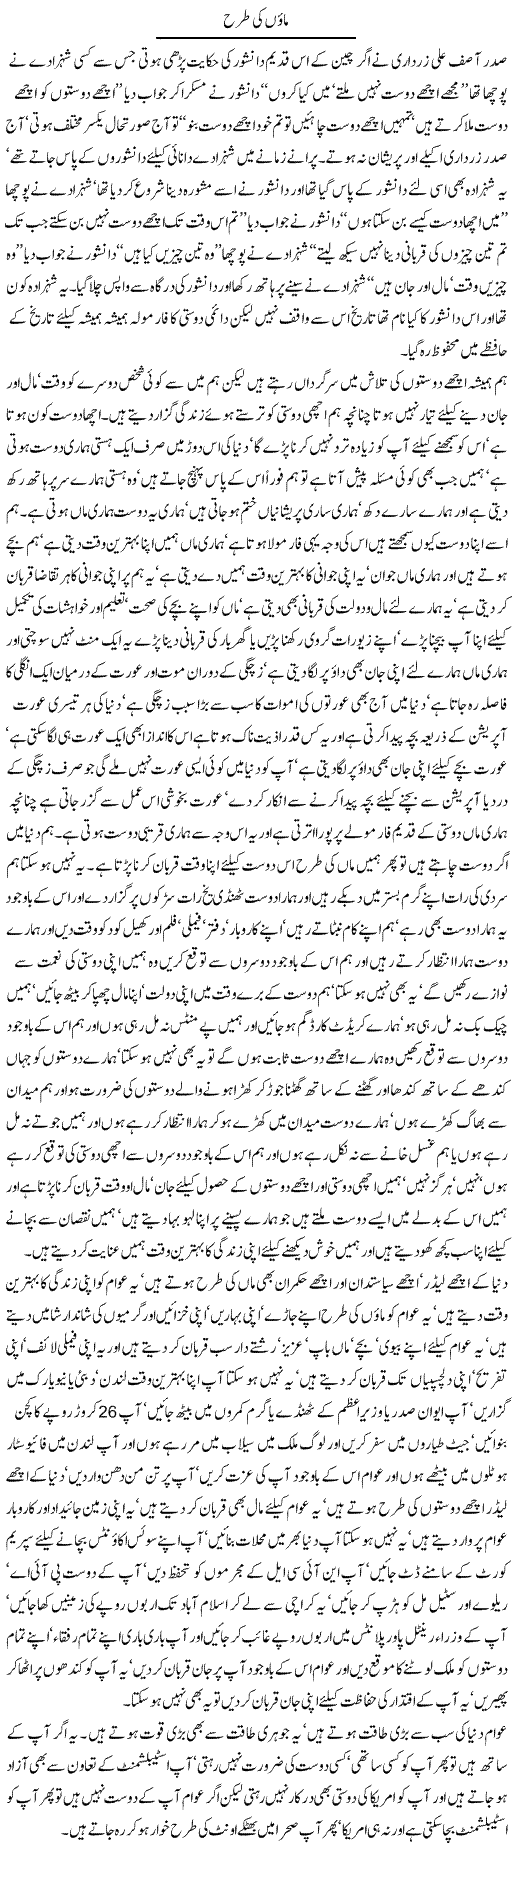 Like Mothers Express Column Javed Chaudhry 18 December 2011